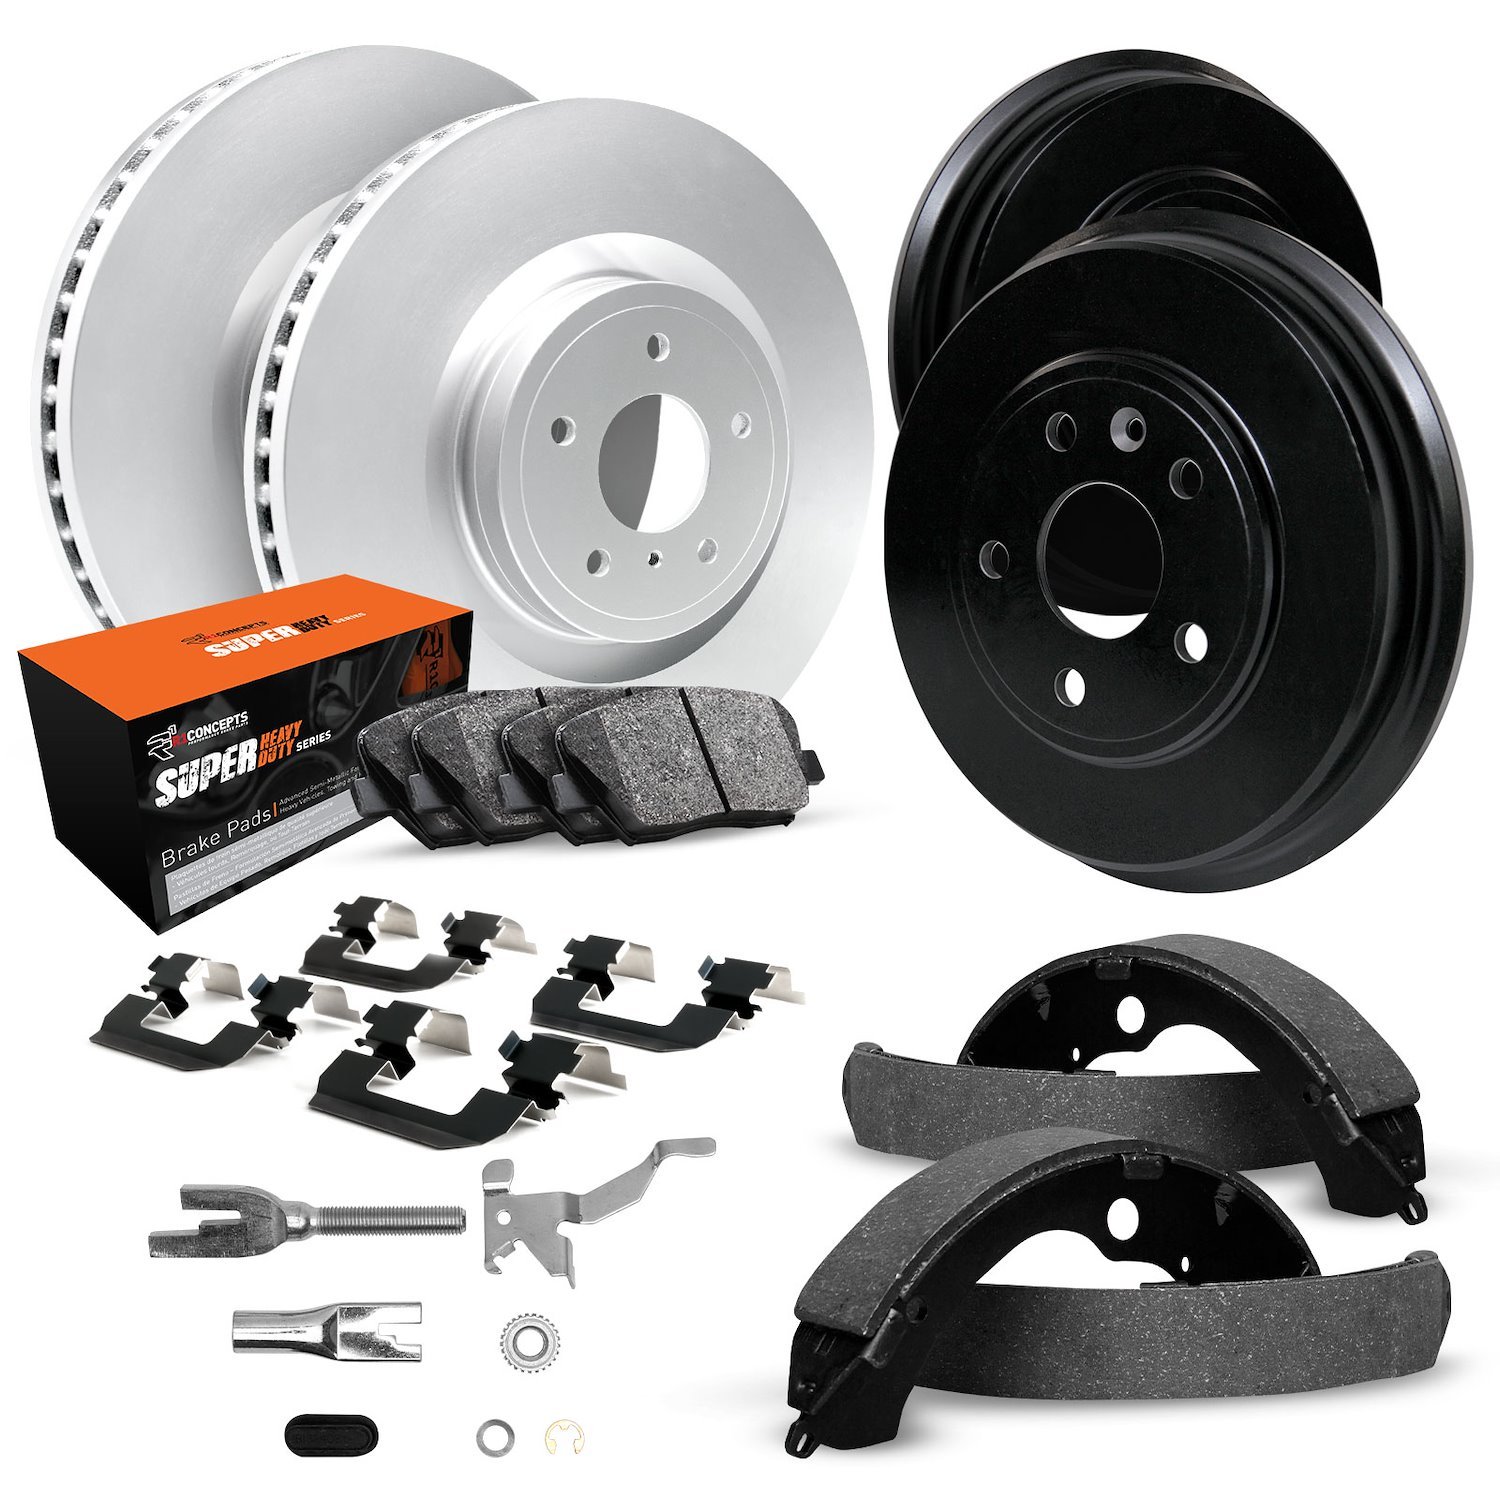 GEO-Carbon Brake Rotor & Drum Set w/Super-Duty Pads, Shoes, Hardware/Adjusters, 1980-1989 Ford/Lincoln/Mercury/Mazda